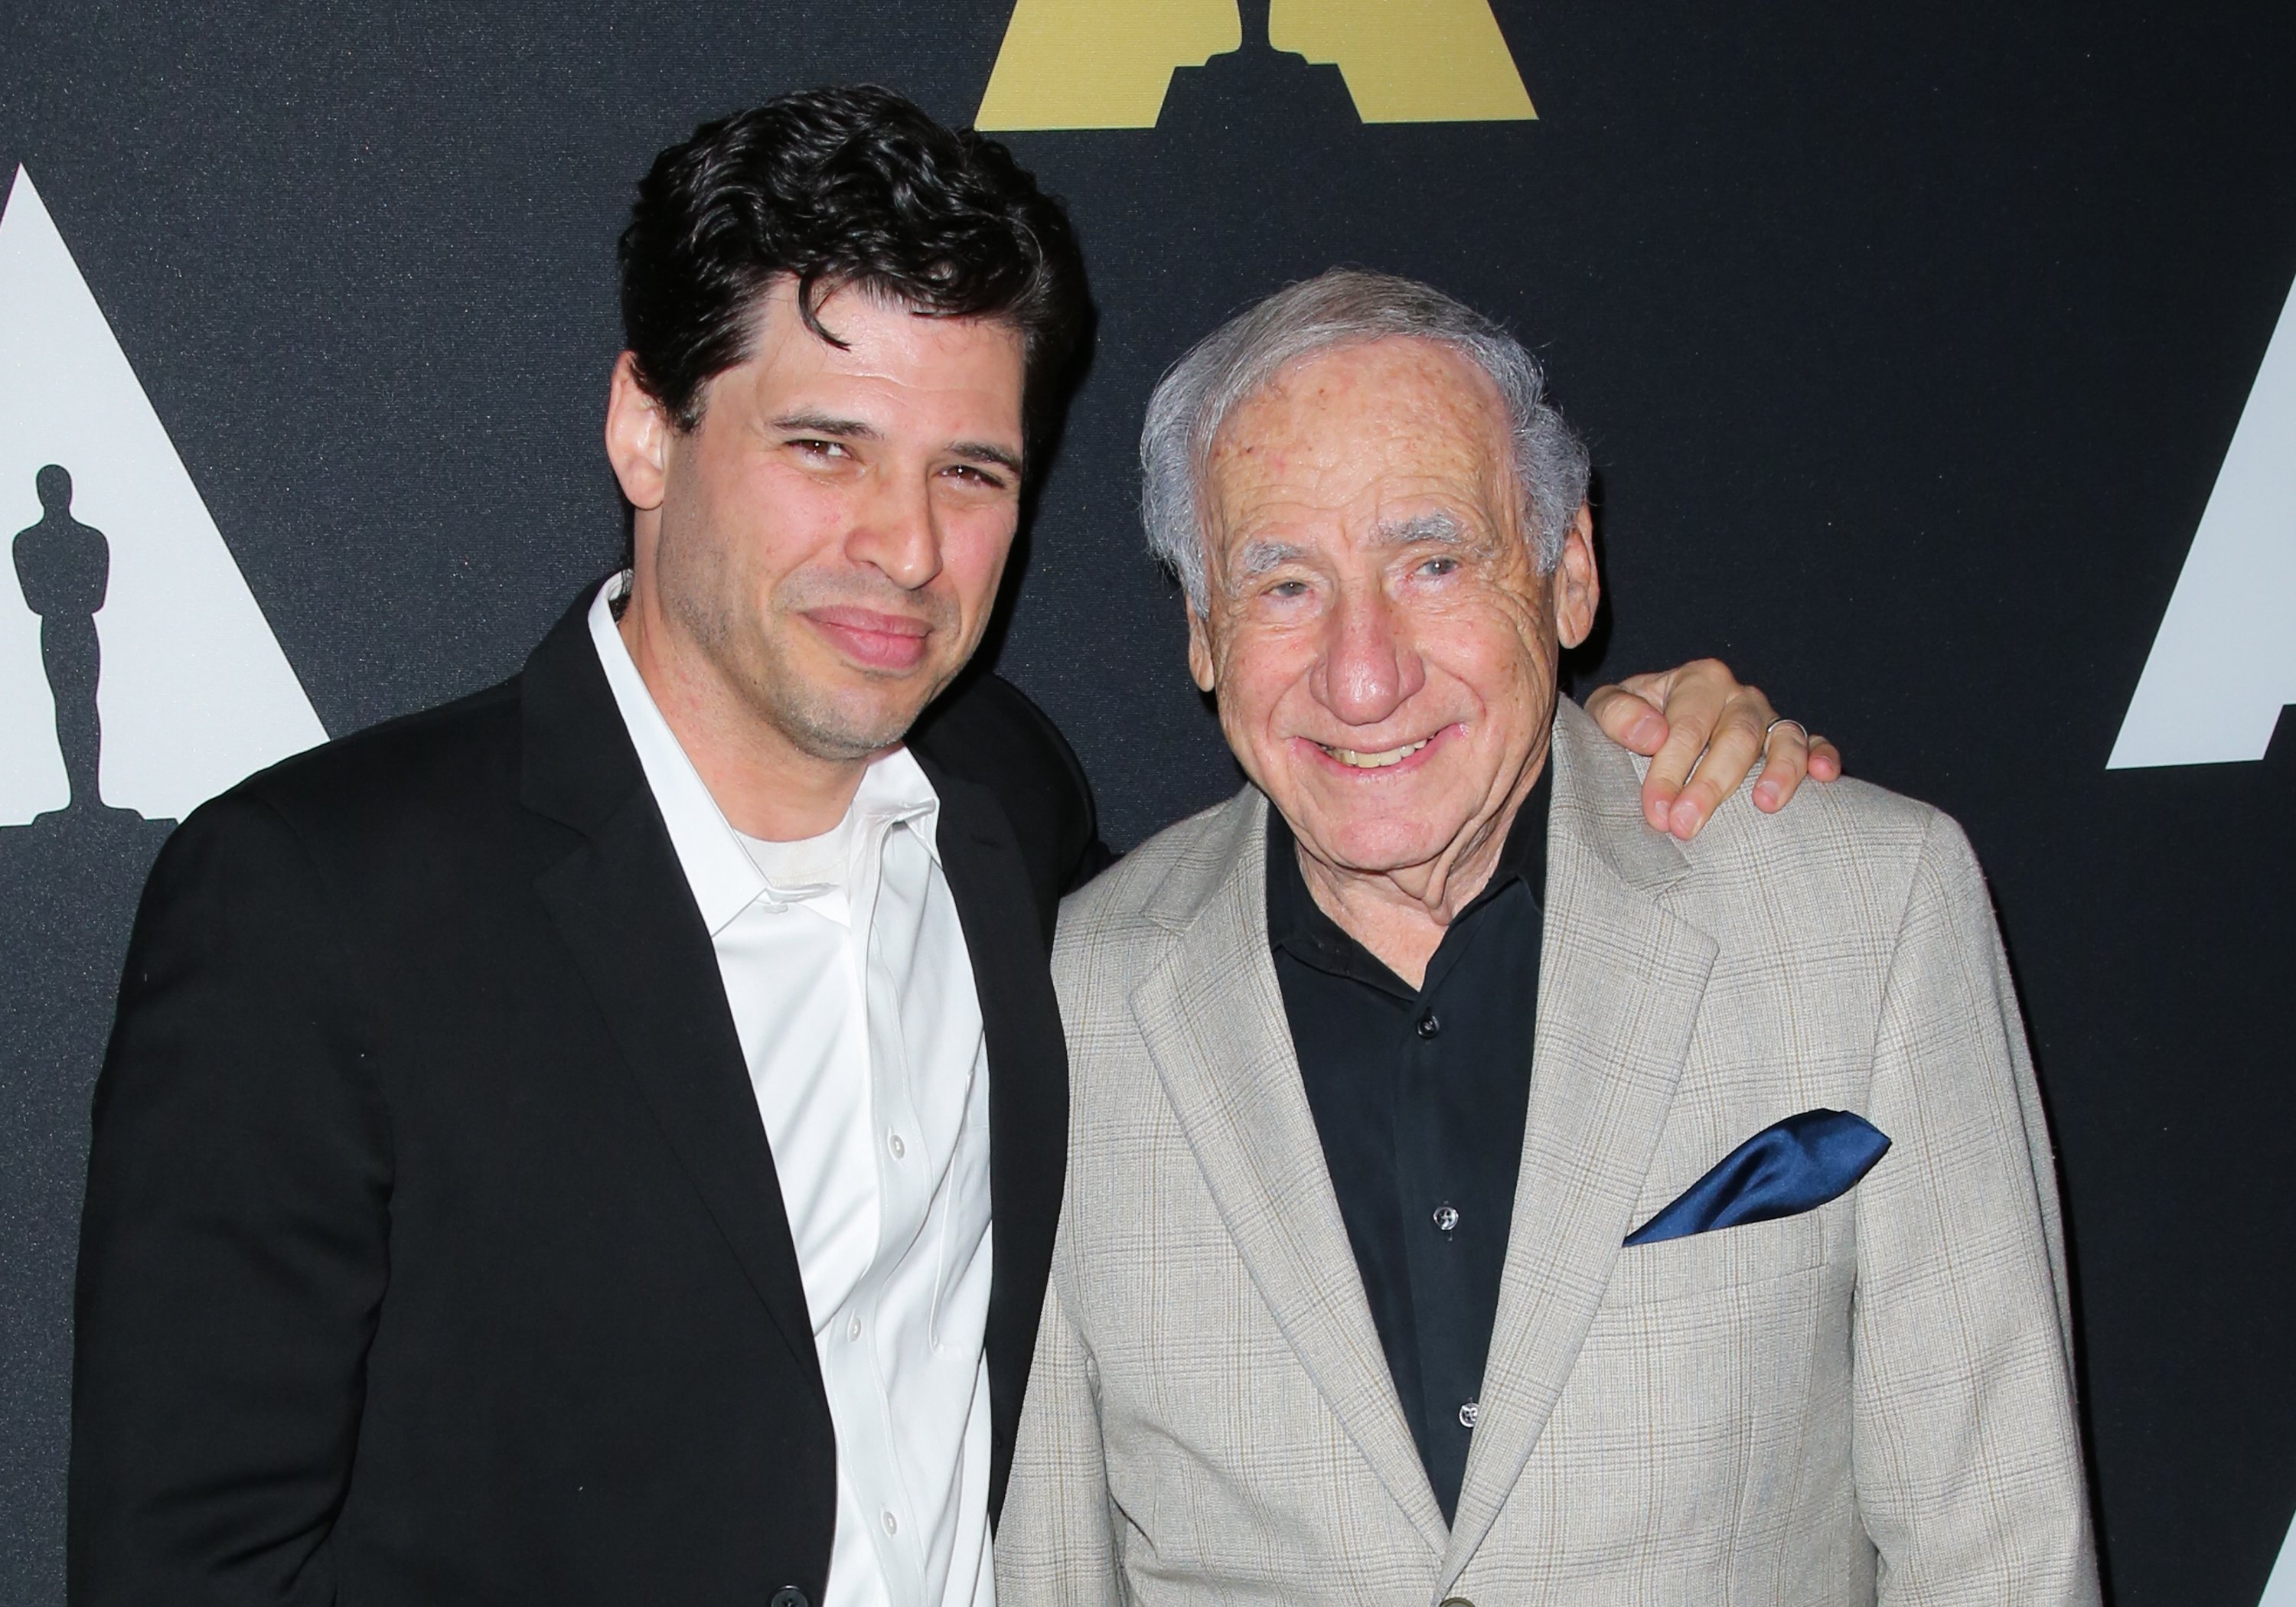 Max Brooks with his father Mel Brooks at the 20th anniversary screening of "The Shawshank Redemption" on November 18, 2014 in Beverly Hills. │Source: Getty Images  